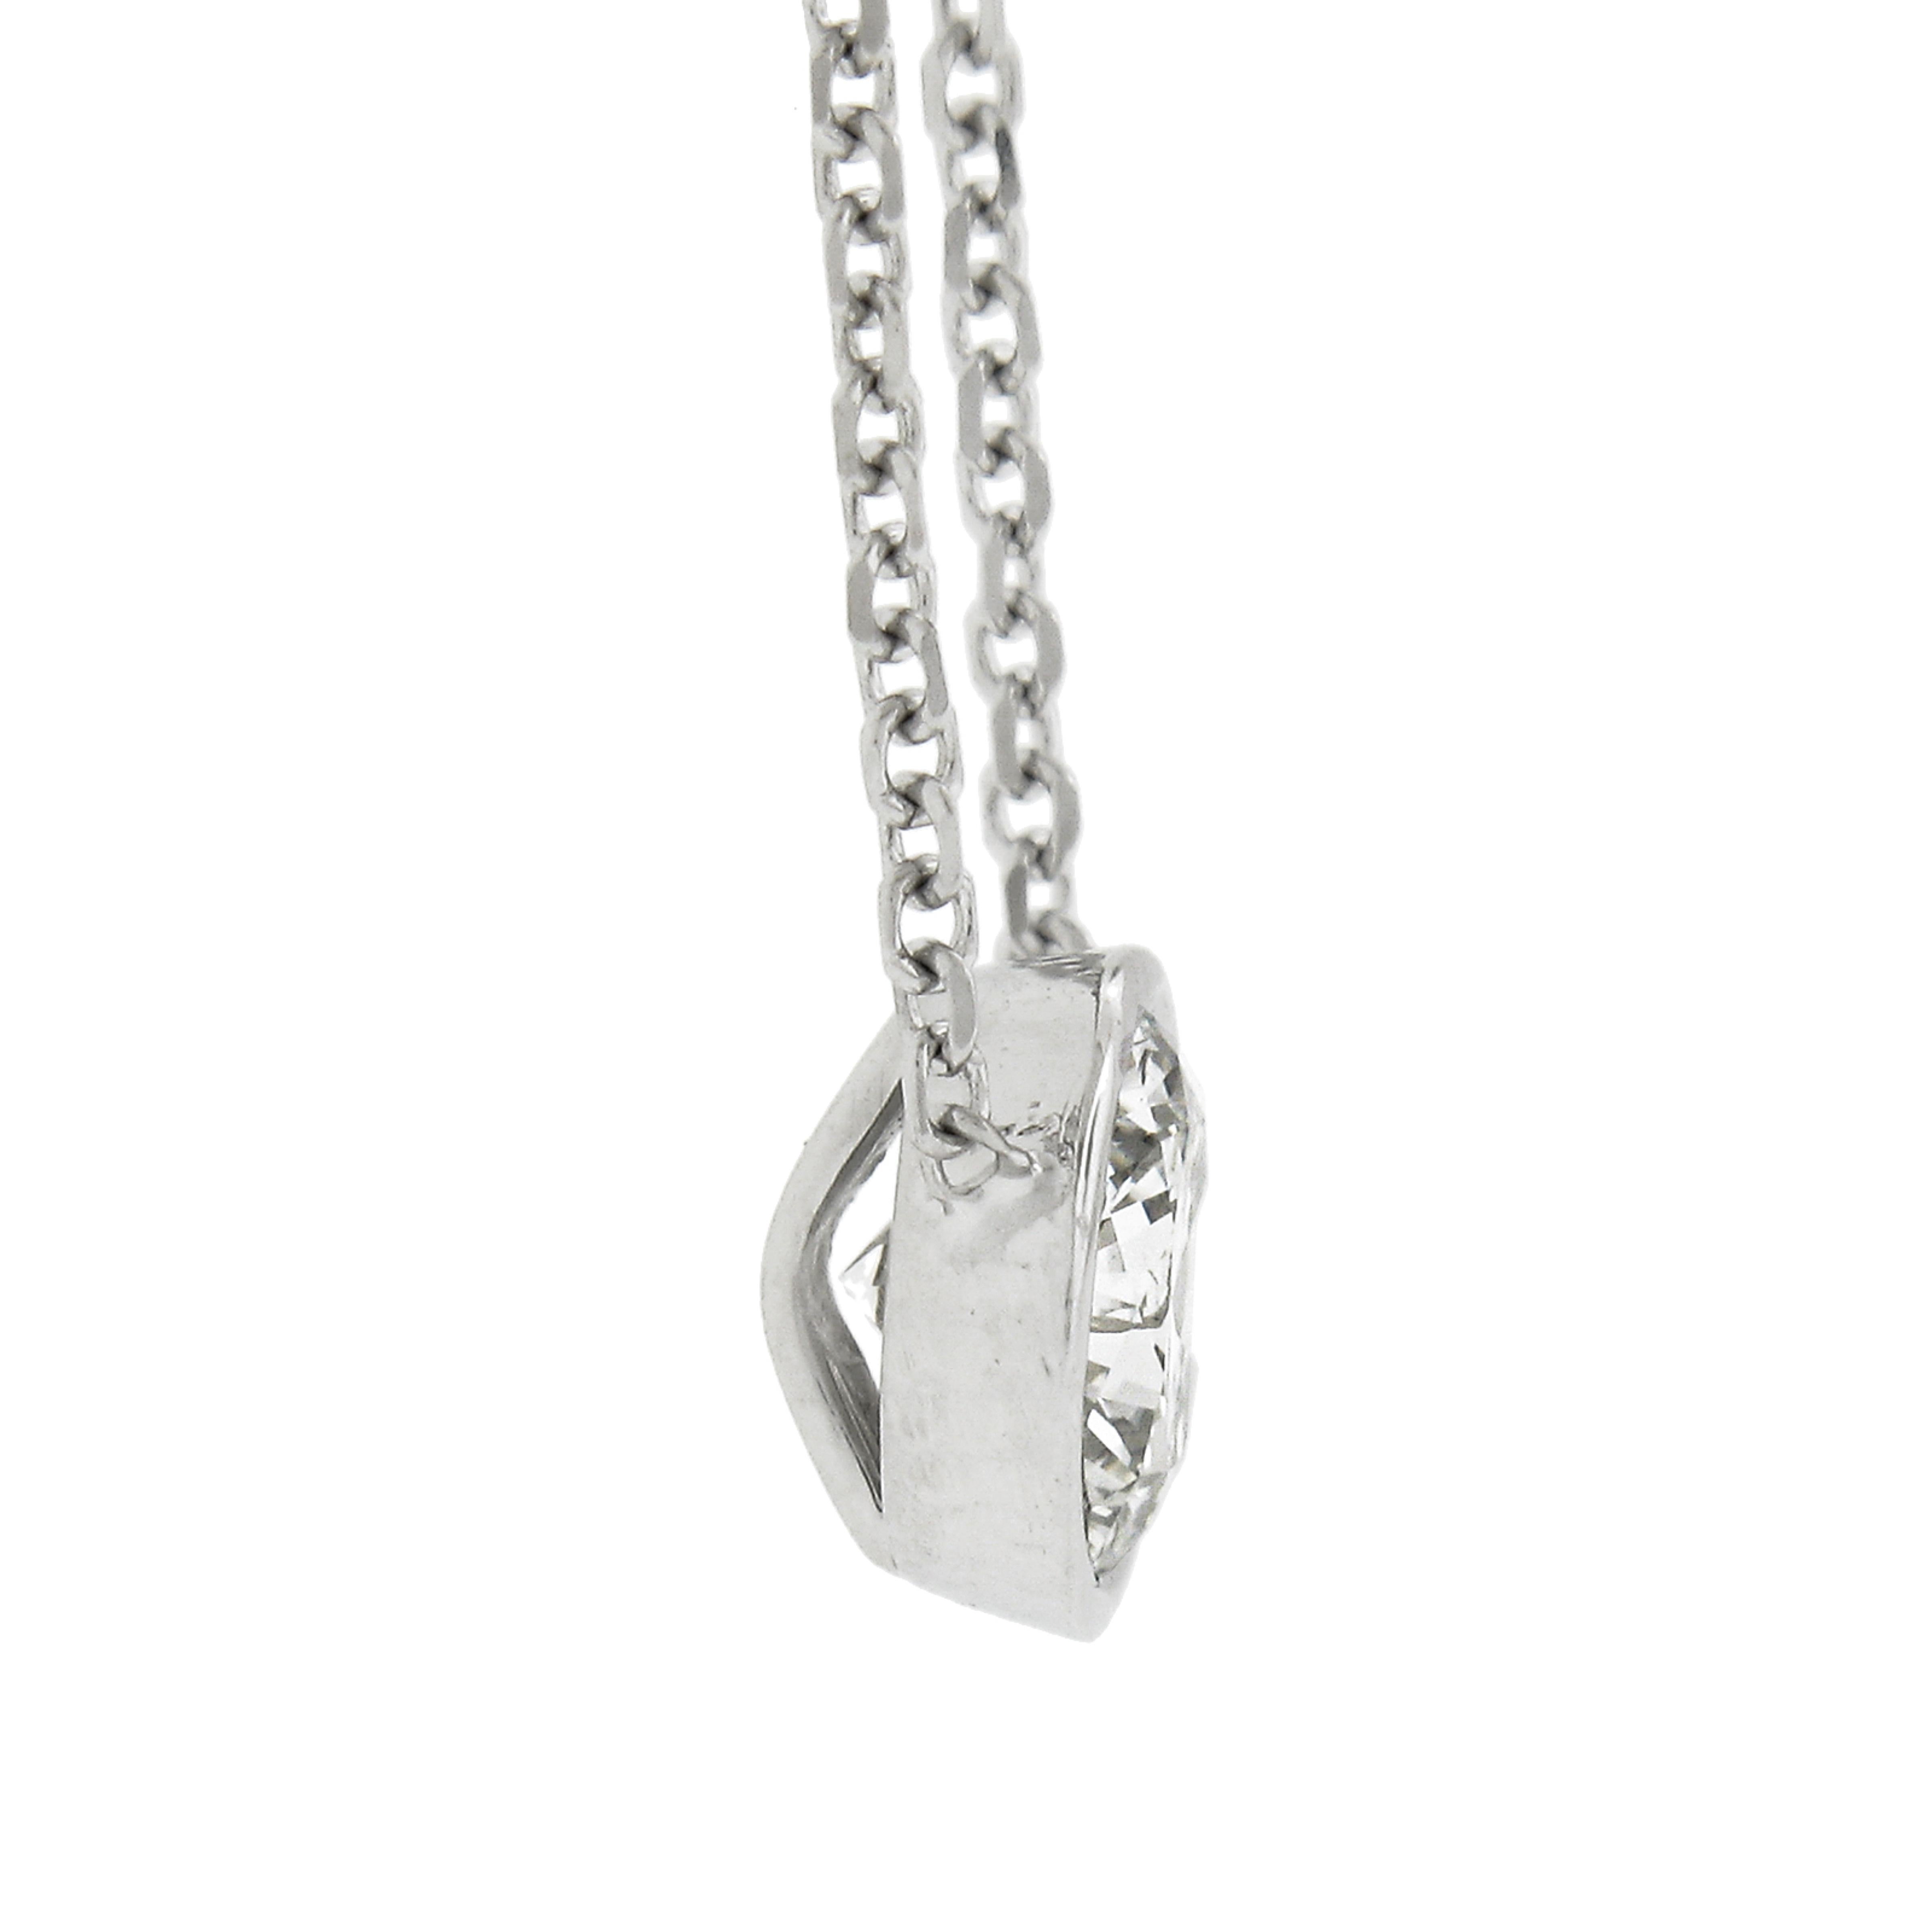 NEW 14k White Gold .70ct GIA Round Diamond Solitaire Pendant & Adjustable Chain For Sale 2